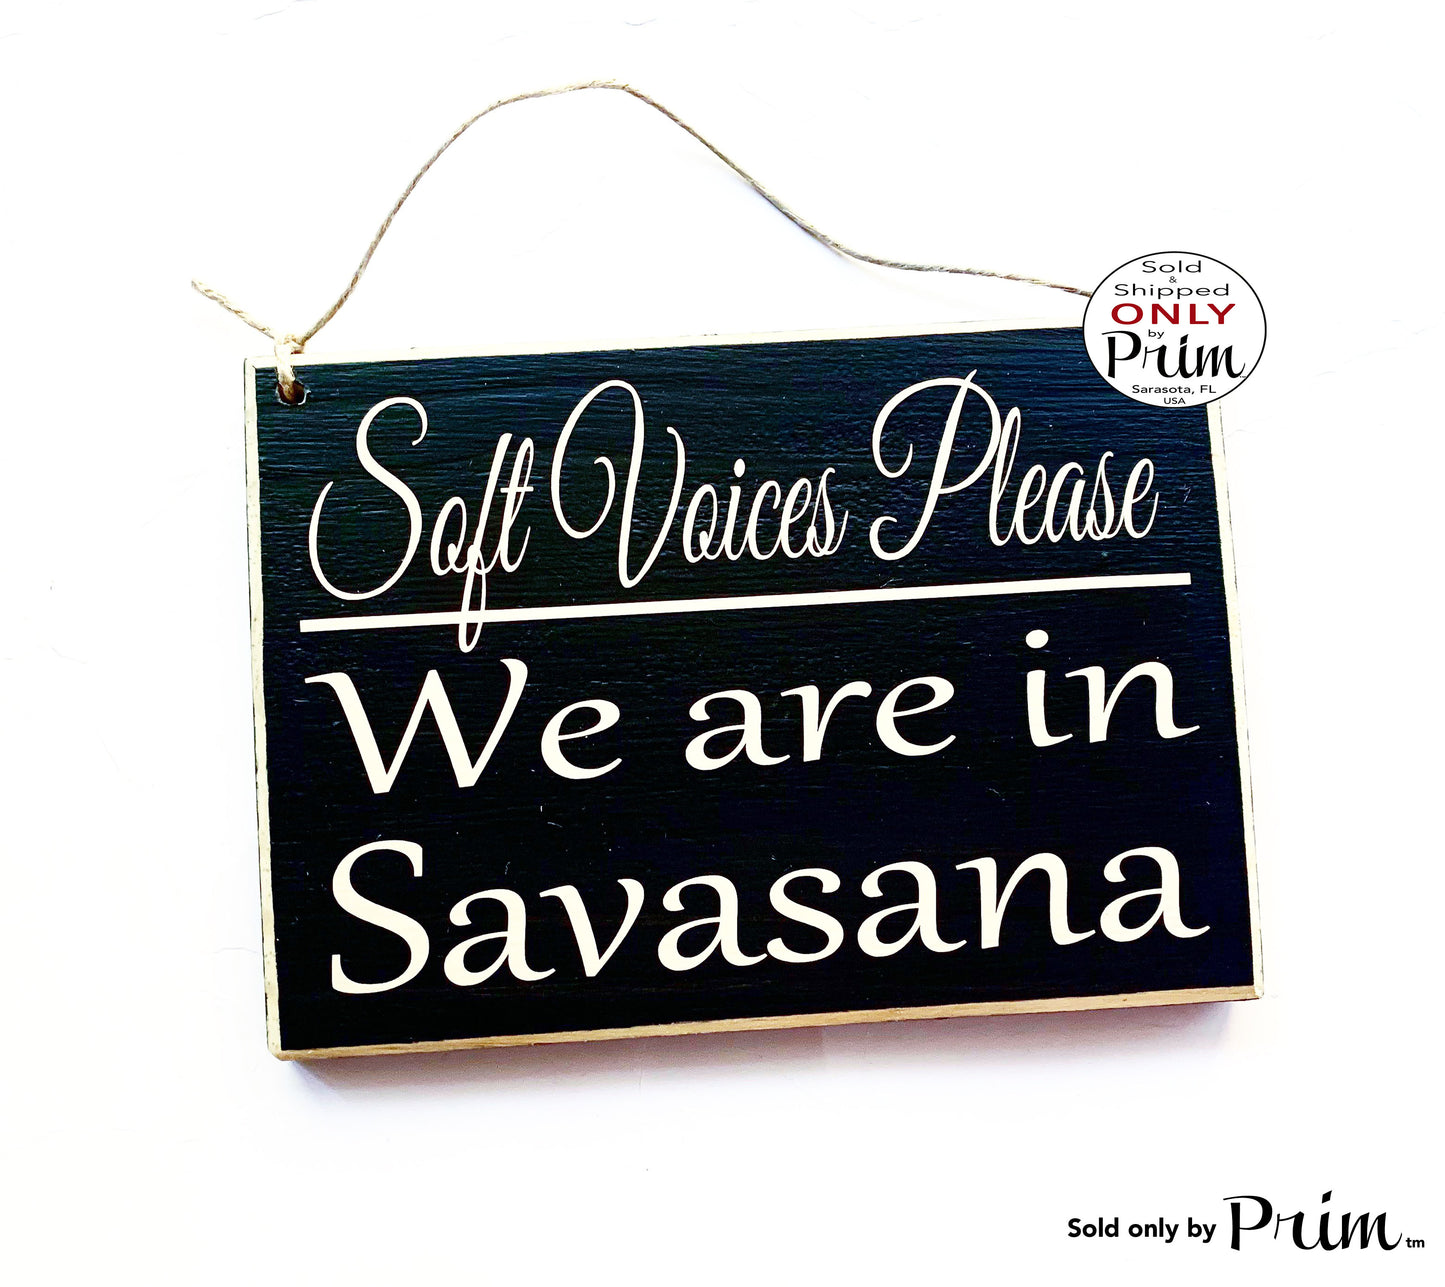 8x6 Soft Voices Please We Are In Savasana Custom Wood Sign | Yoga Stress Reliever In Session Namaste Relaxation Meditation  Door Plaque